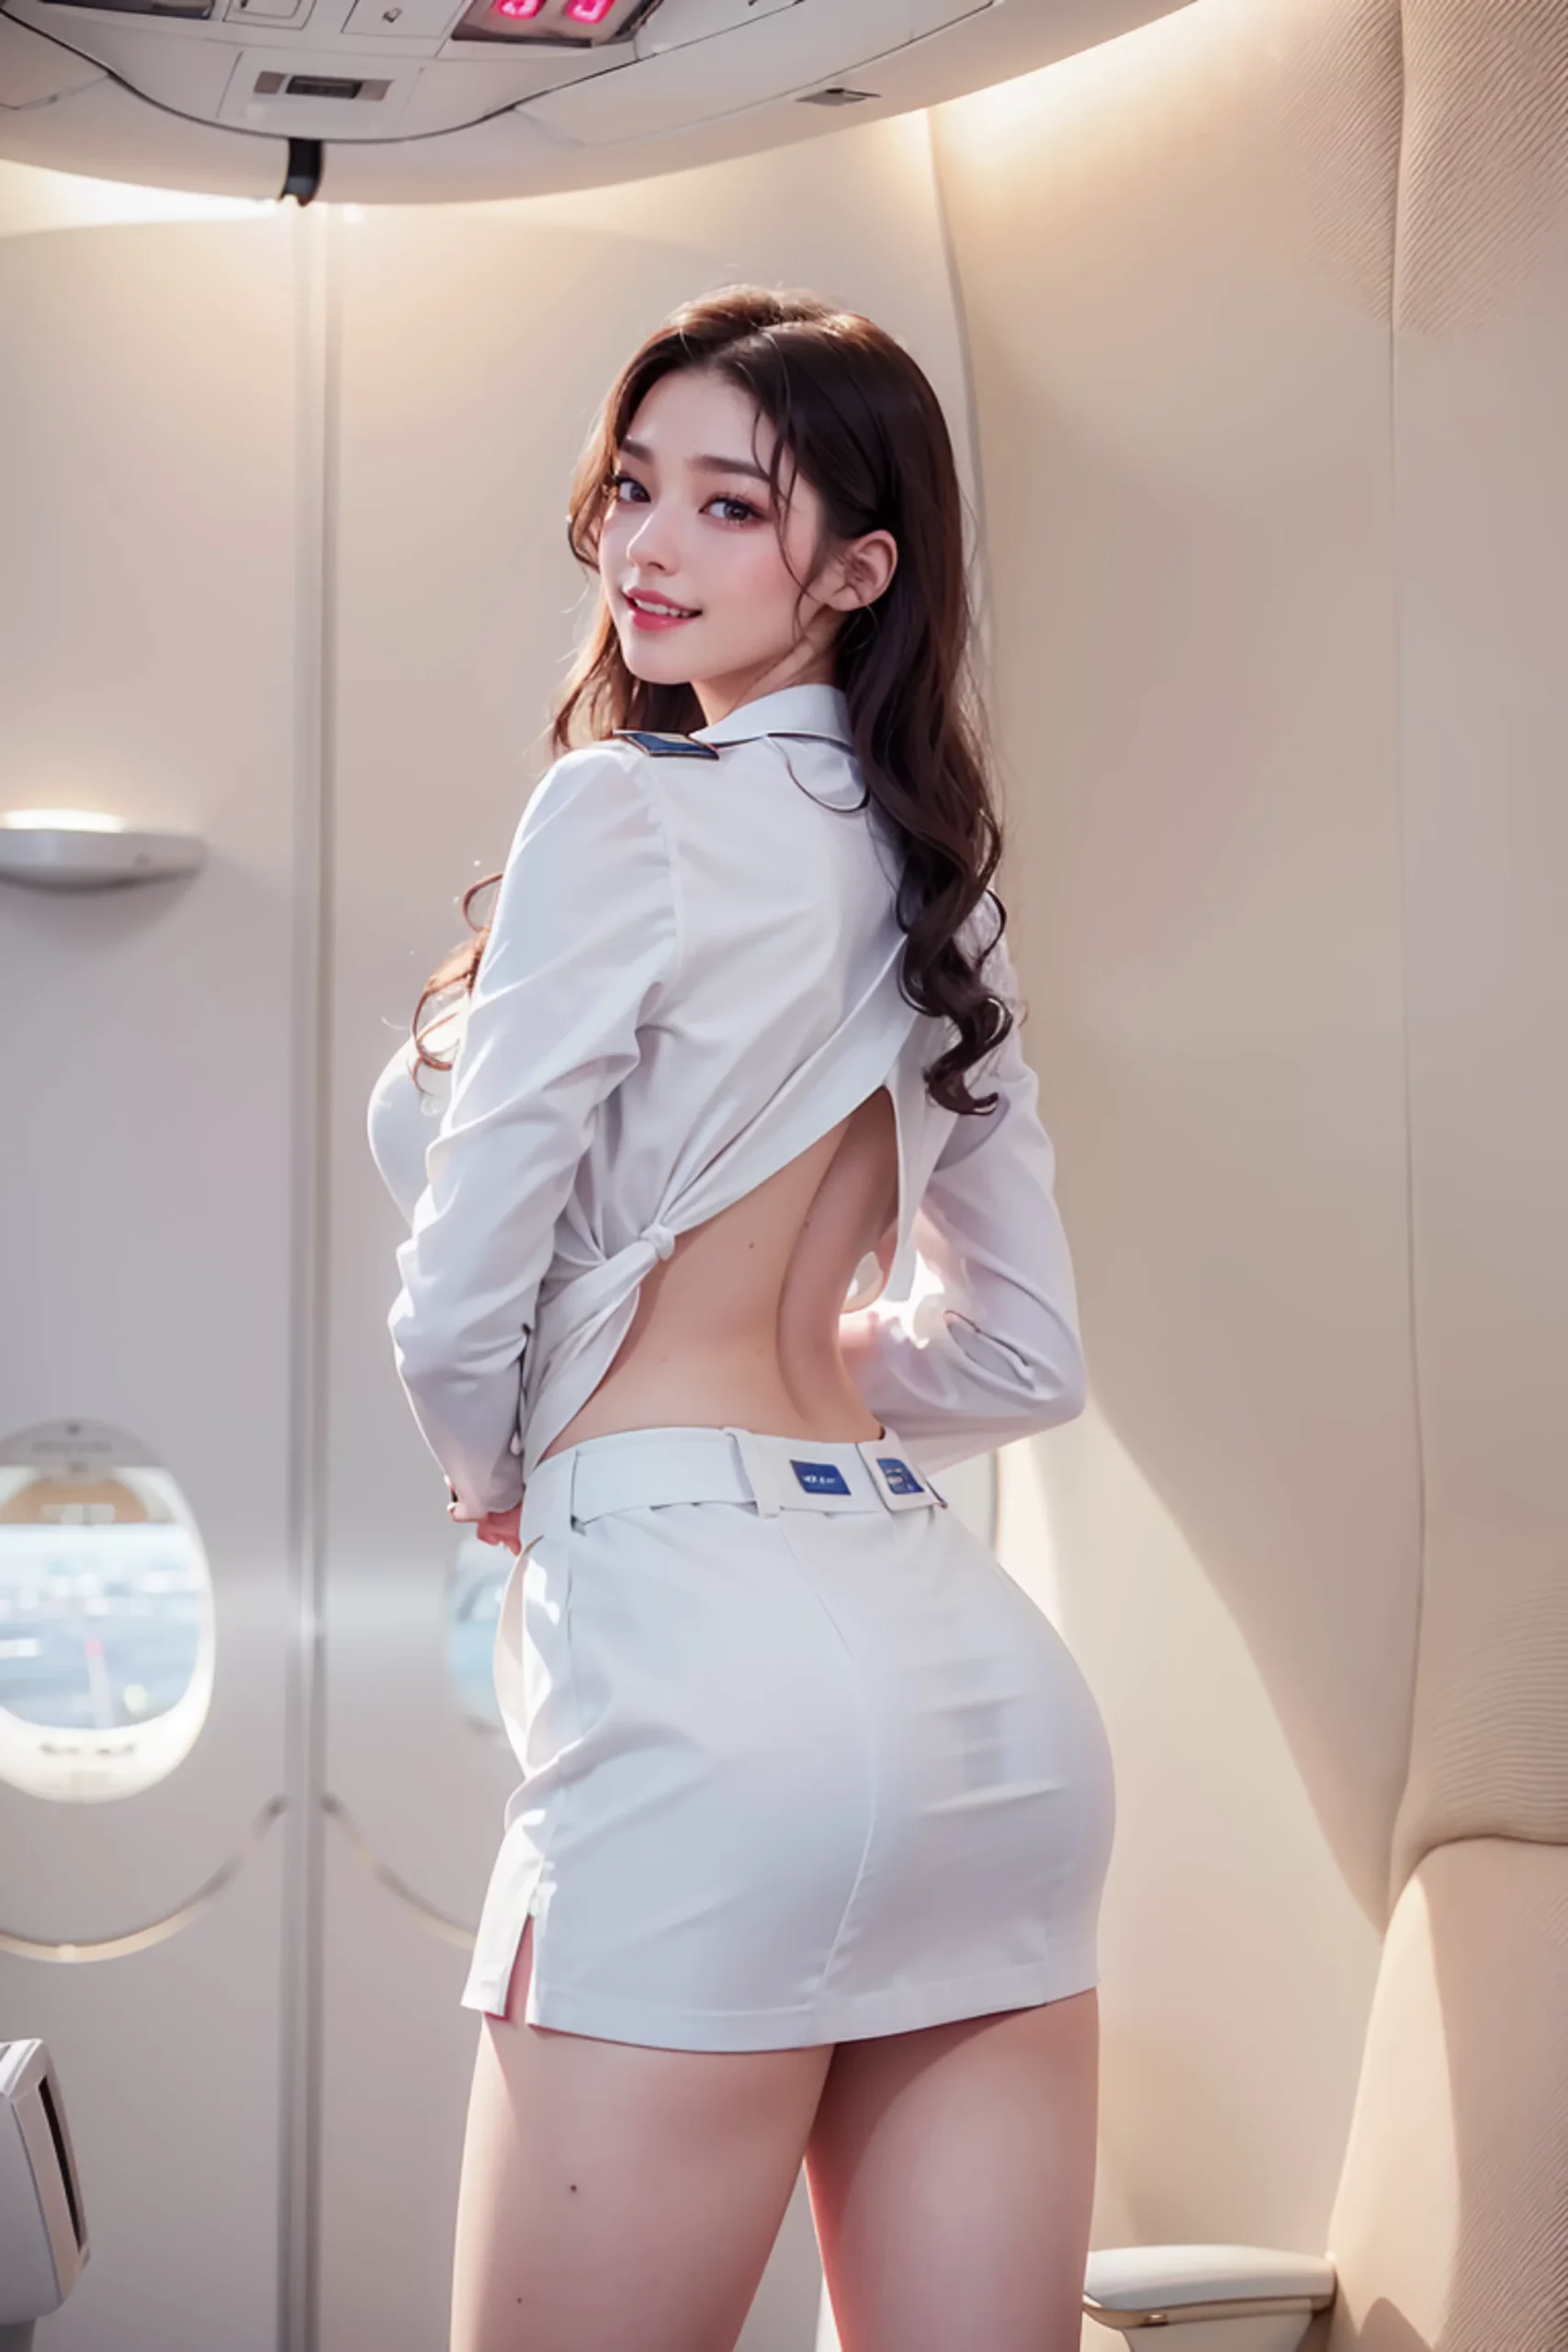 Sexy Flight Attendant Cosplay Vol. 2 Images 32